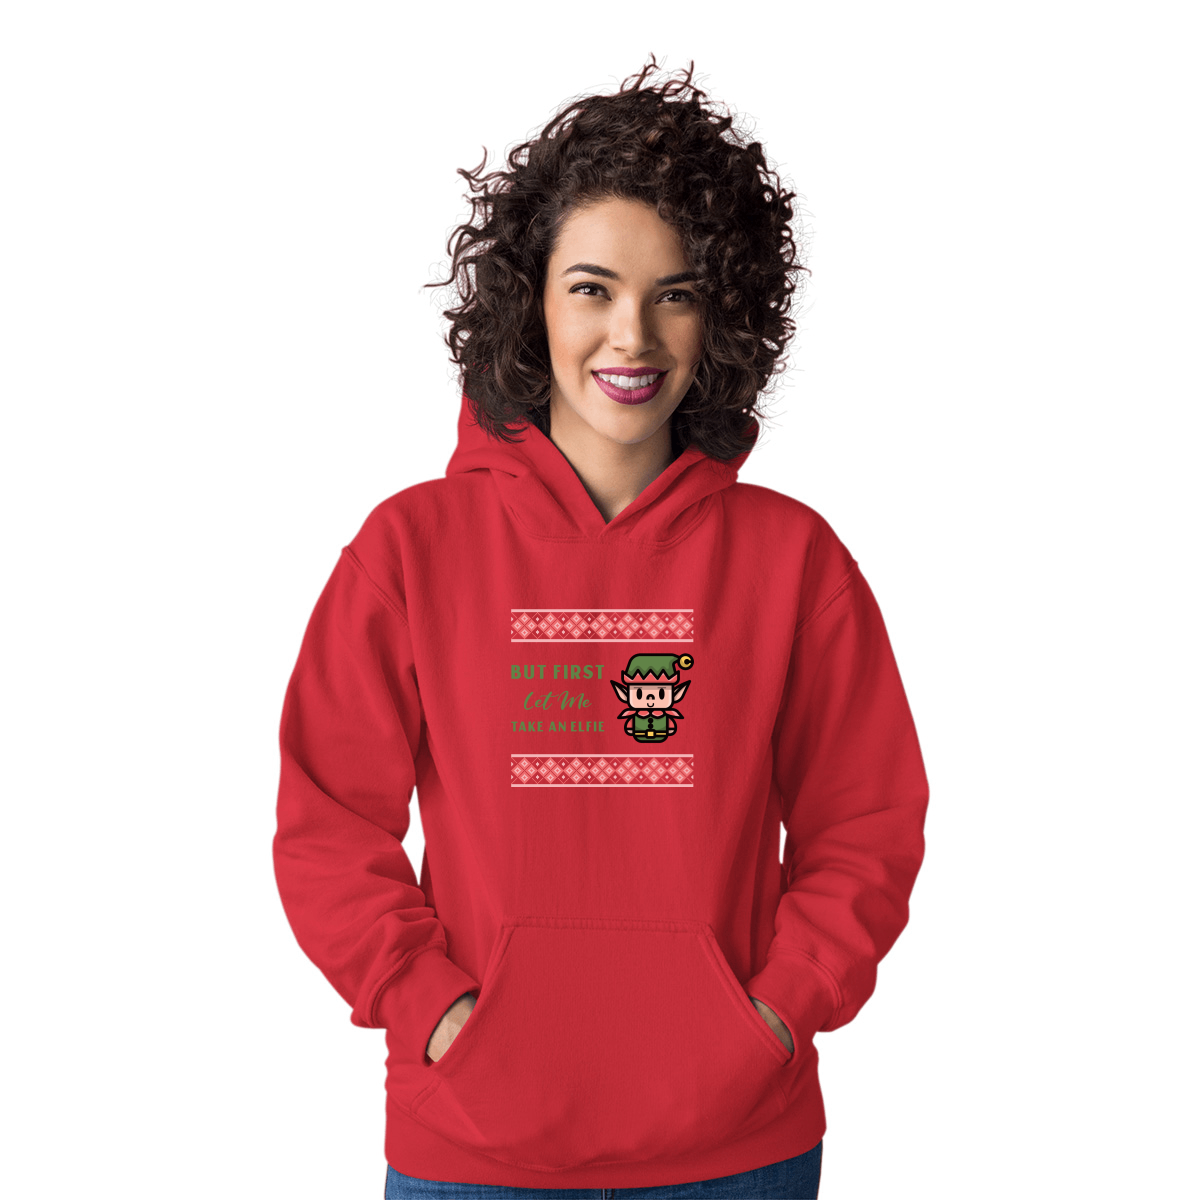 But First Let Me Take an Elfie Unisex Hoodie | Red